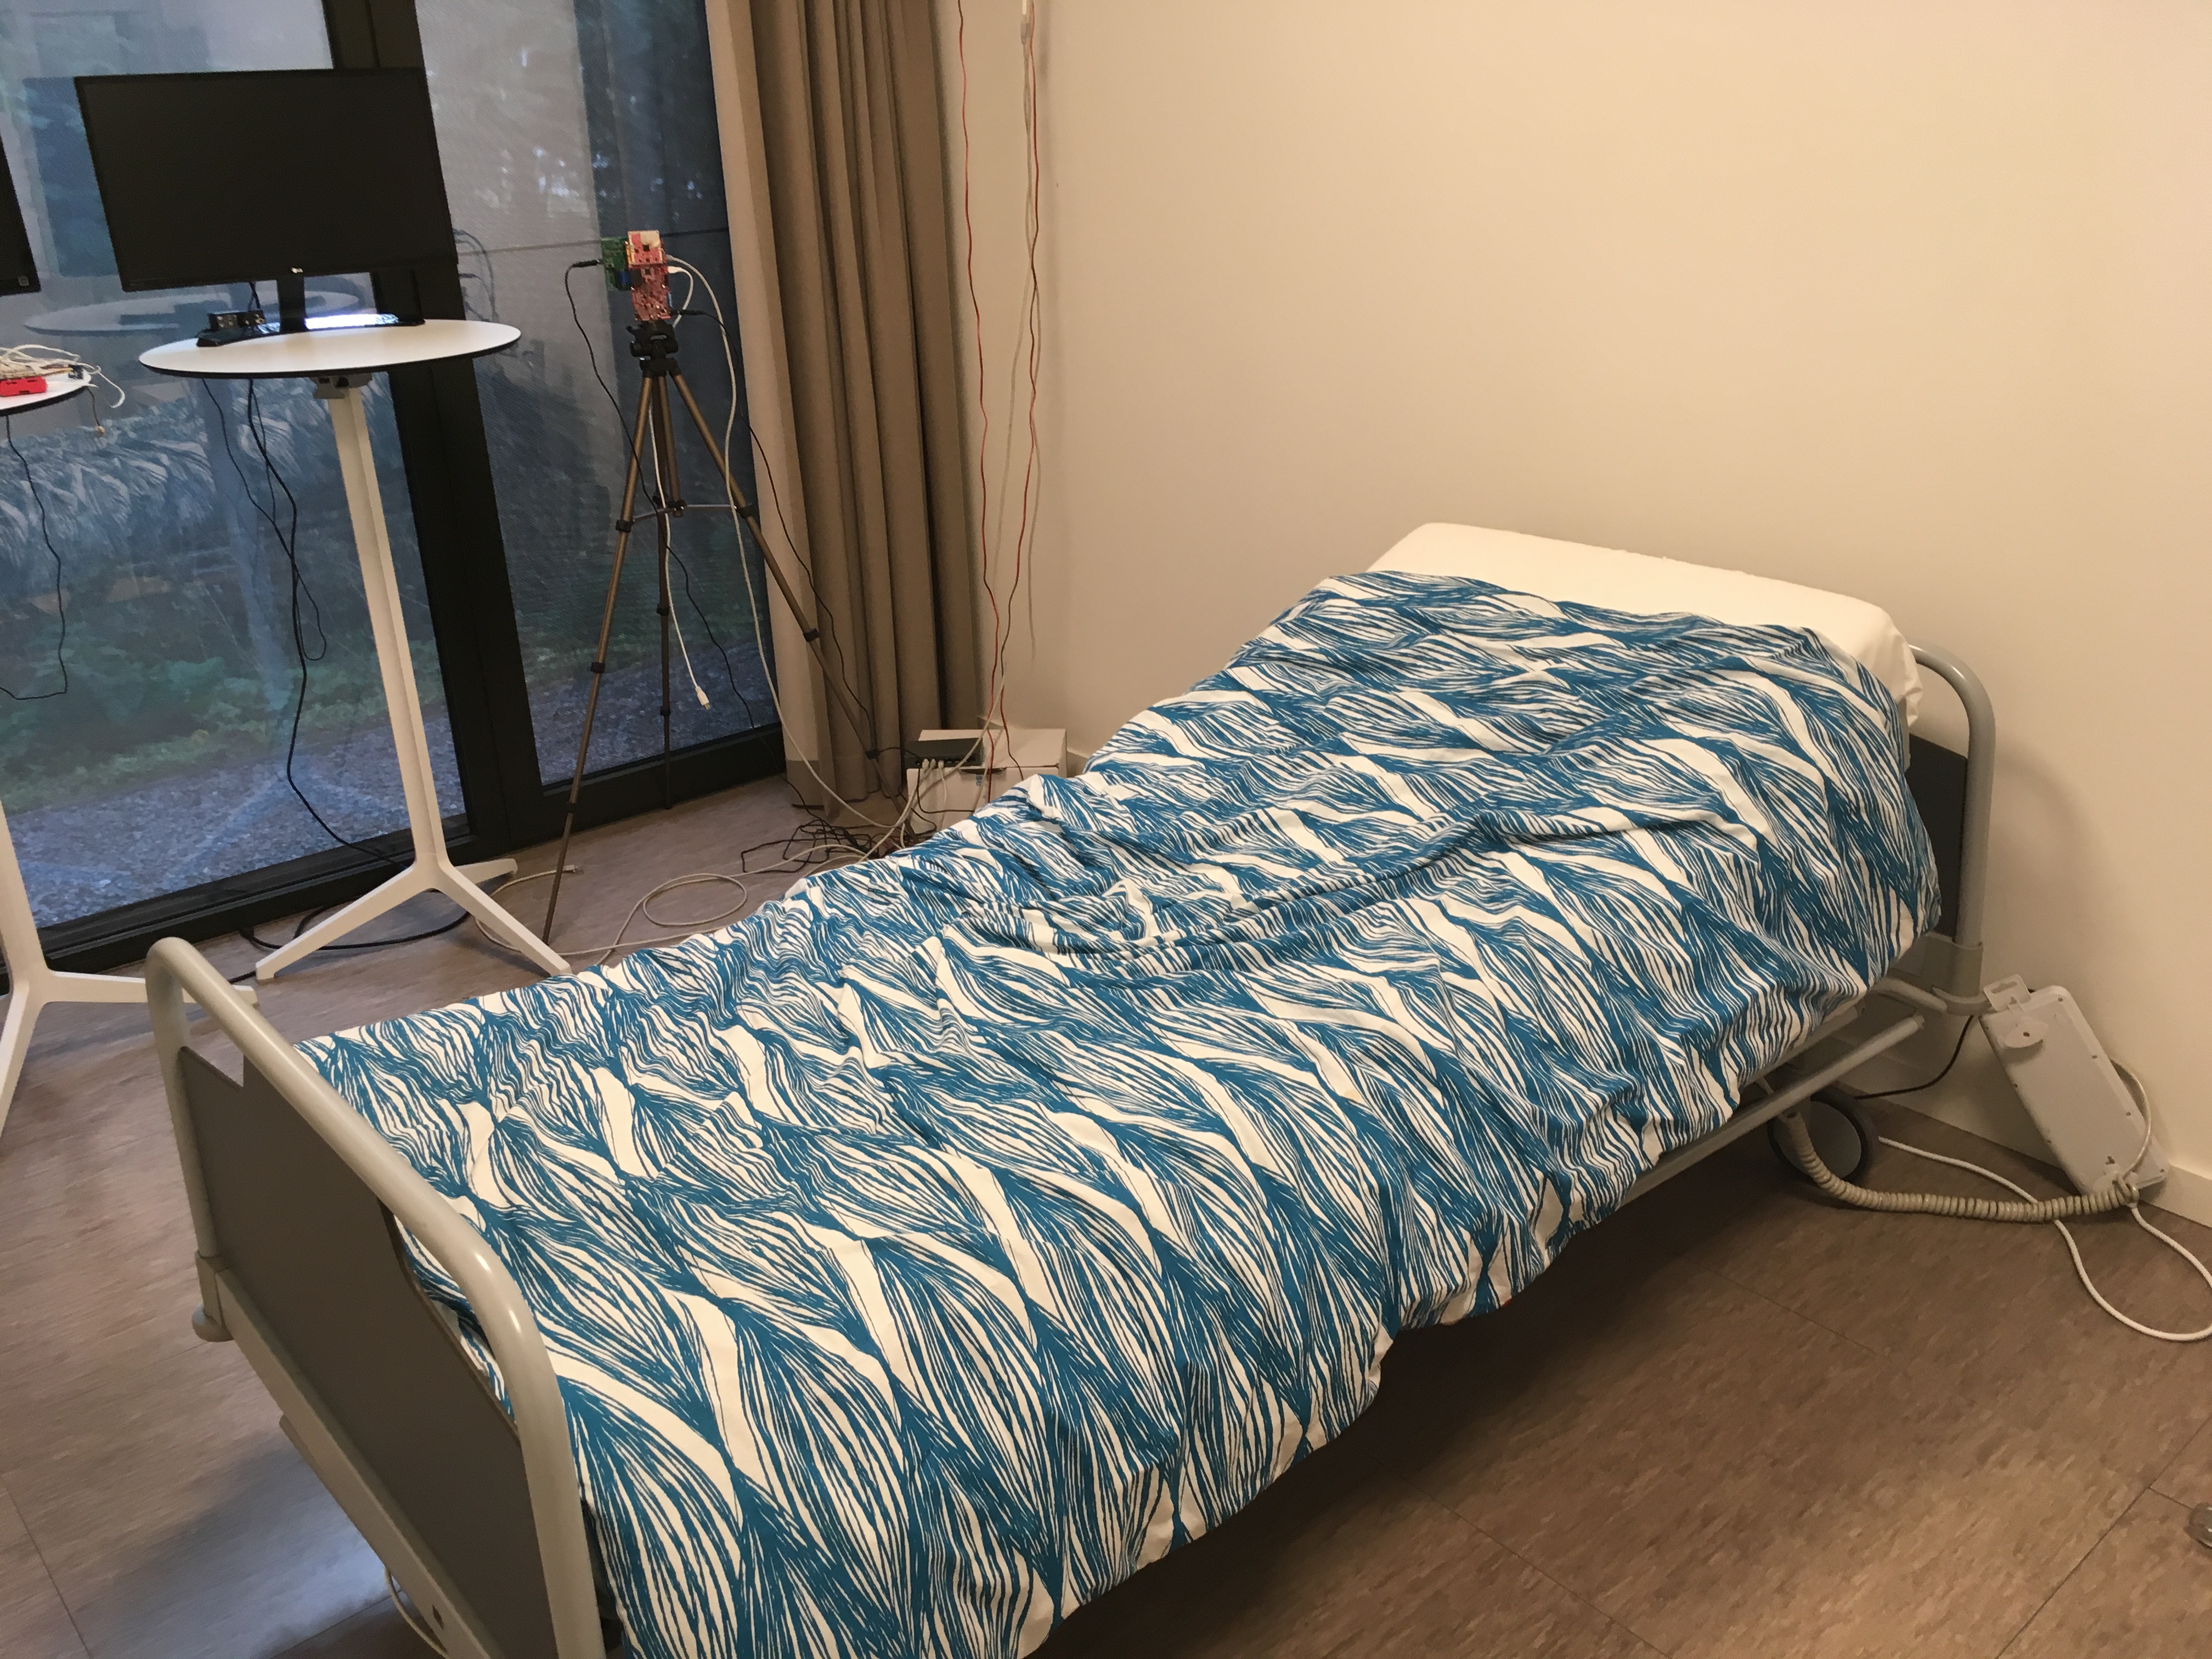 HomeLab’s care room, equipped with indoor radar. Research question: can indoor radar technology be used to recognize people based on their movements? Further research aims at finding out whether the same technology can be used to detect specific human activities.